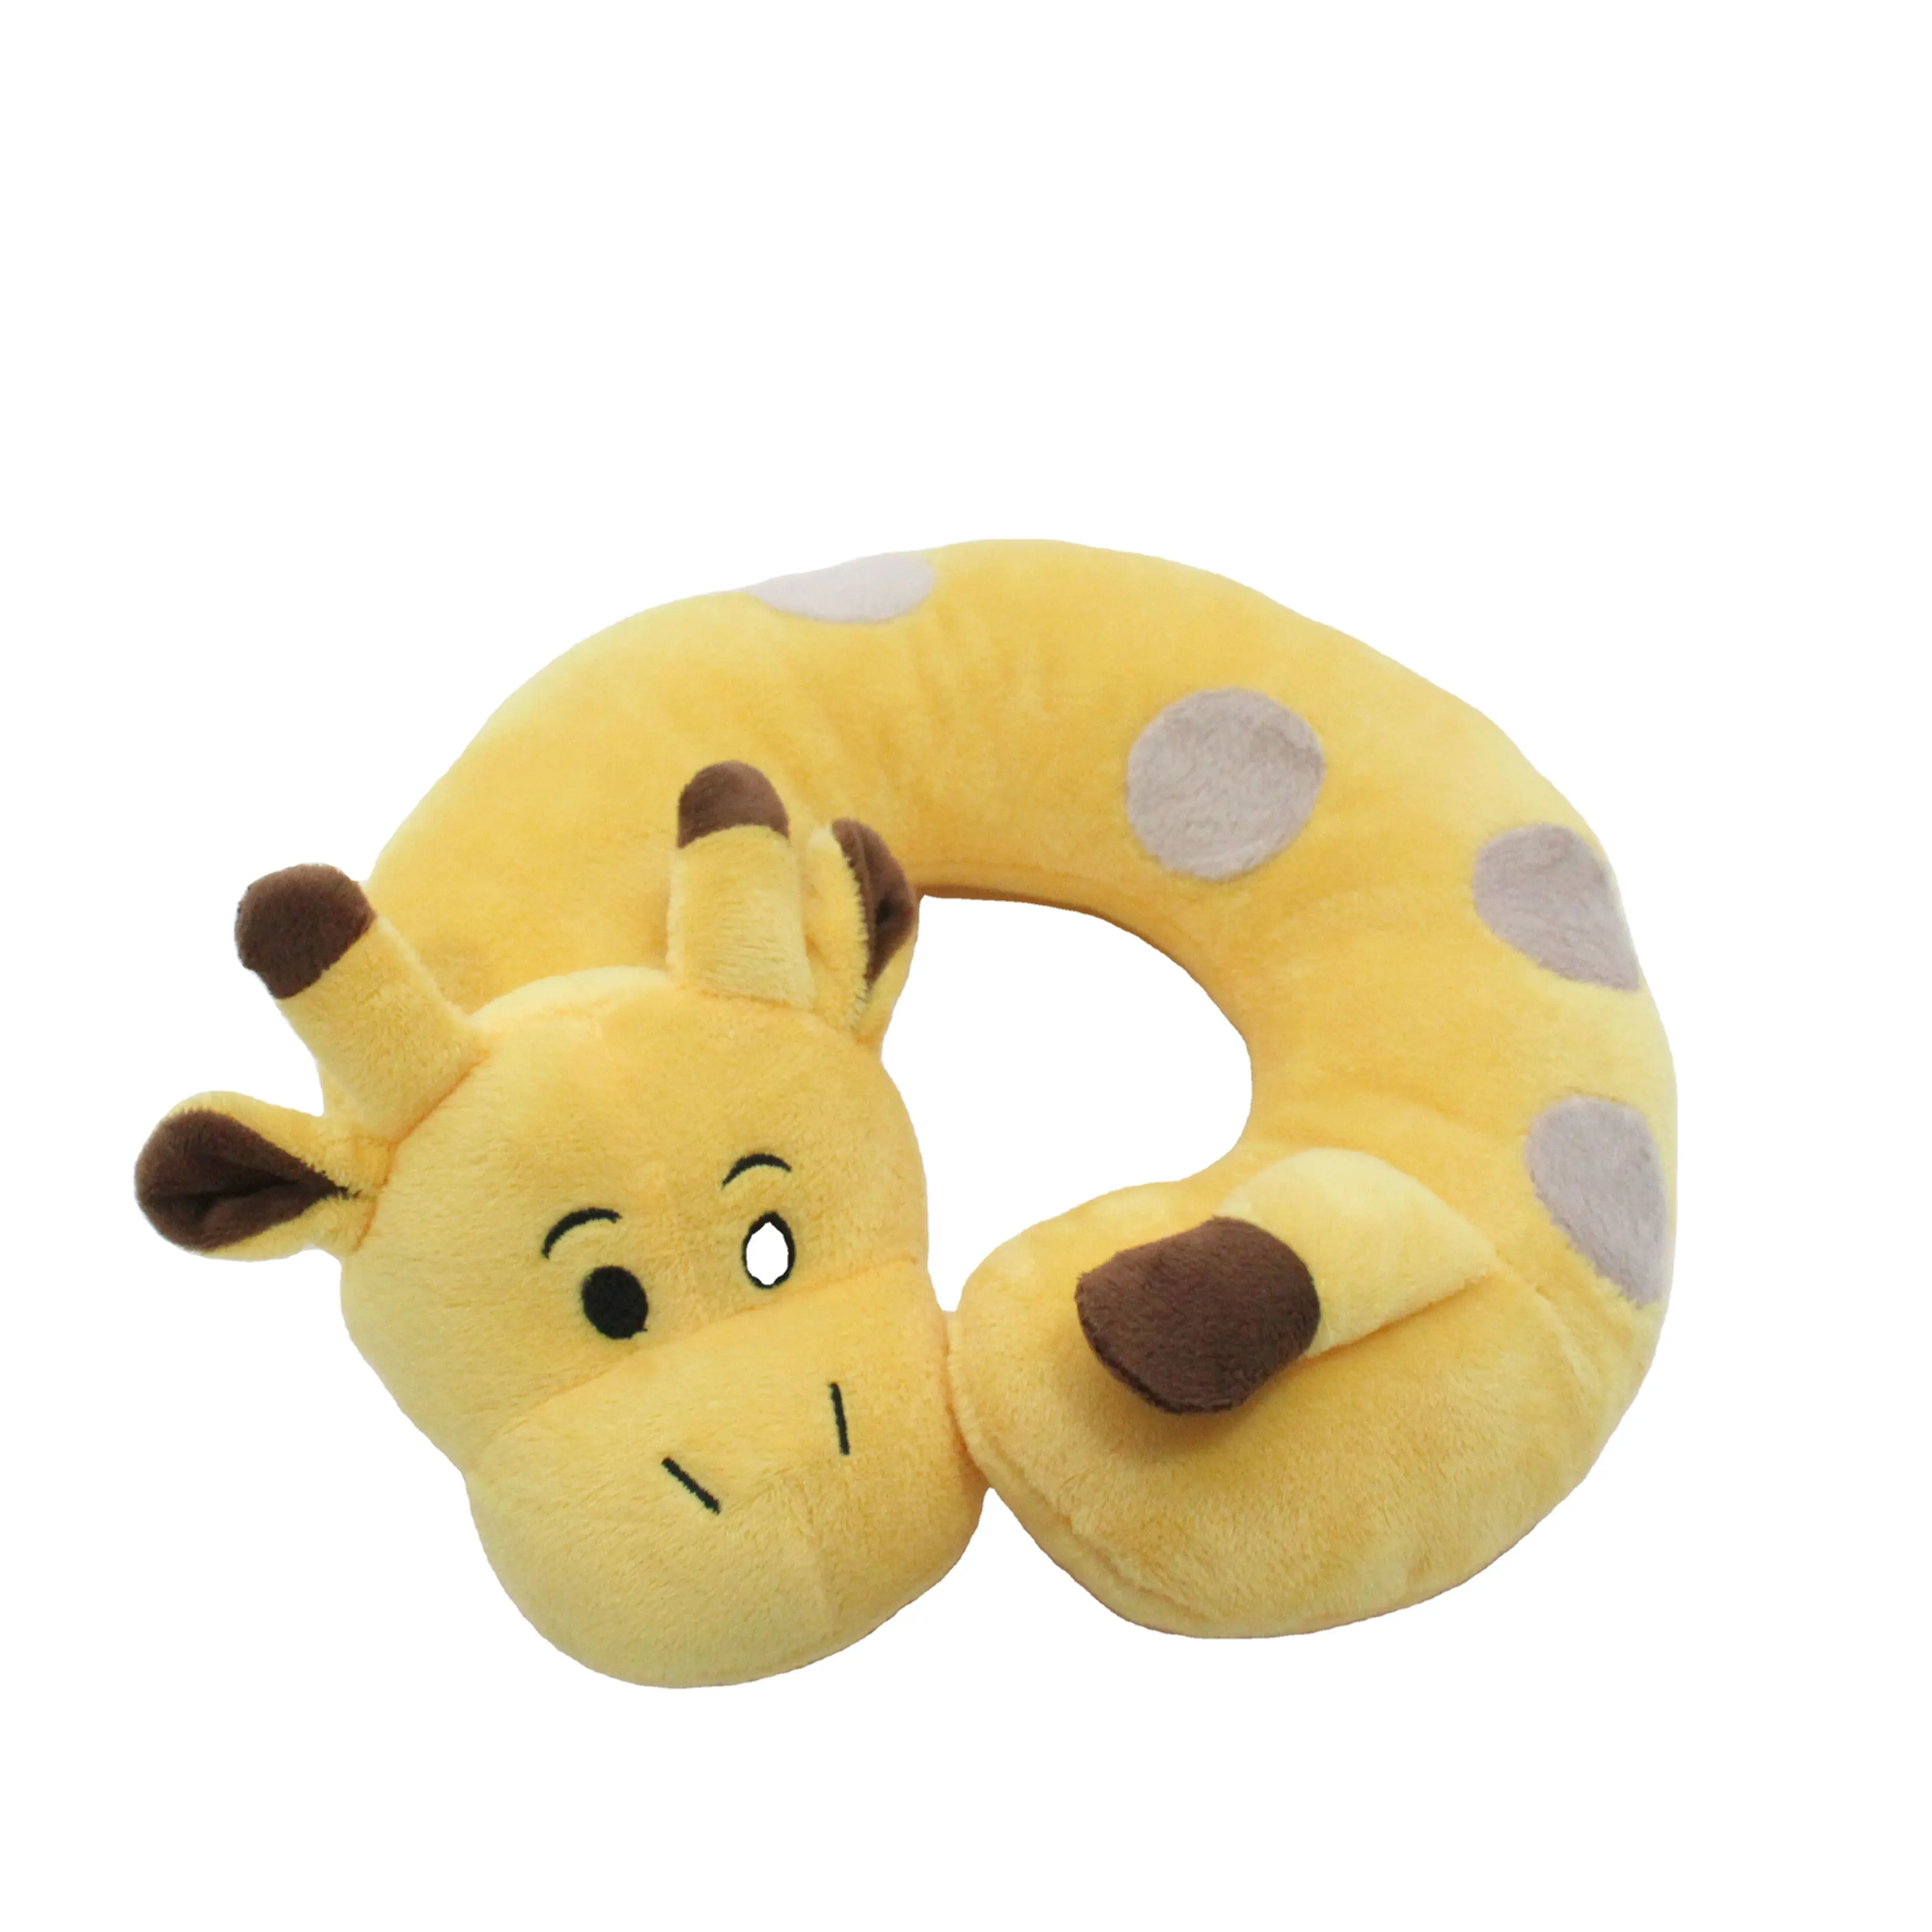 Stuffed Plush Toy animals shaped toys neck pillow adult